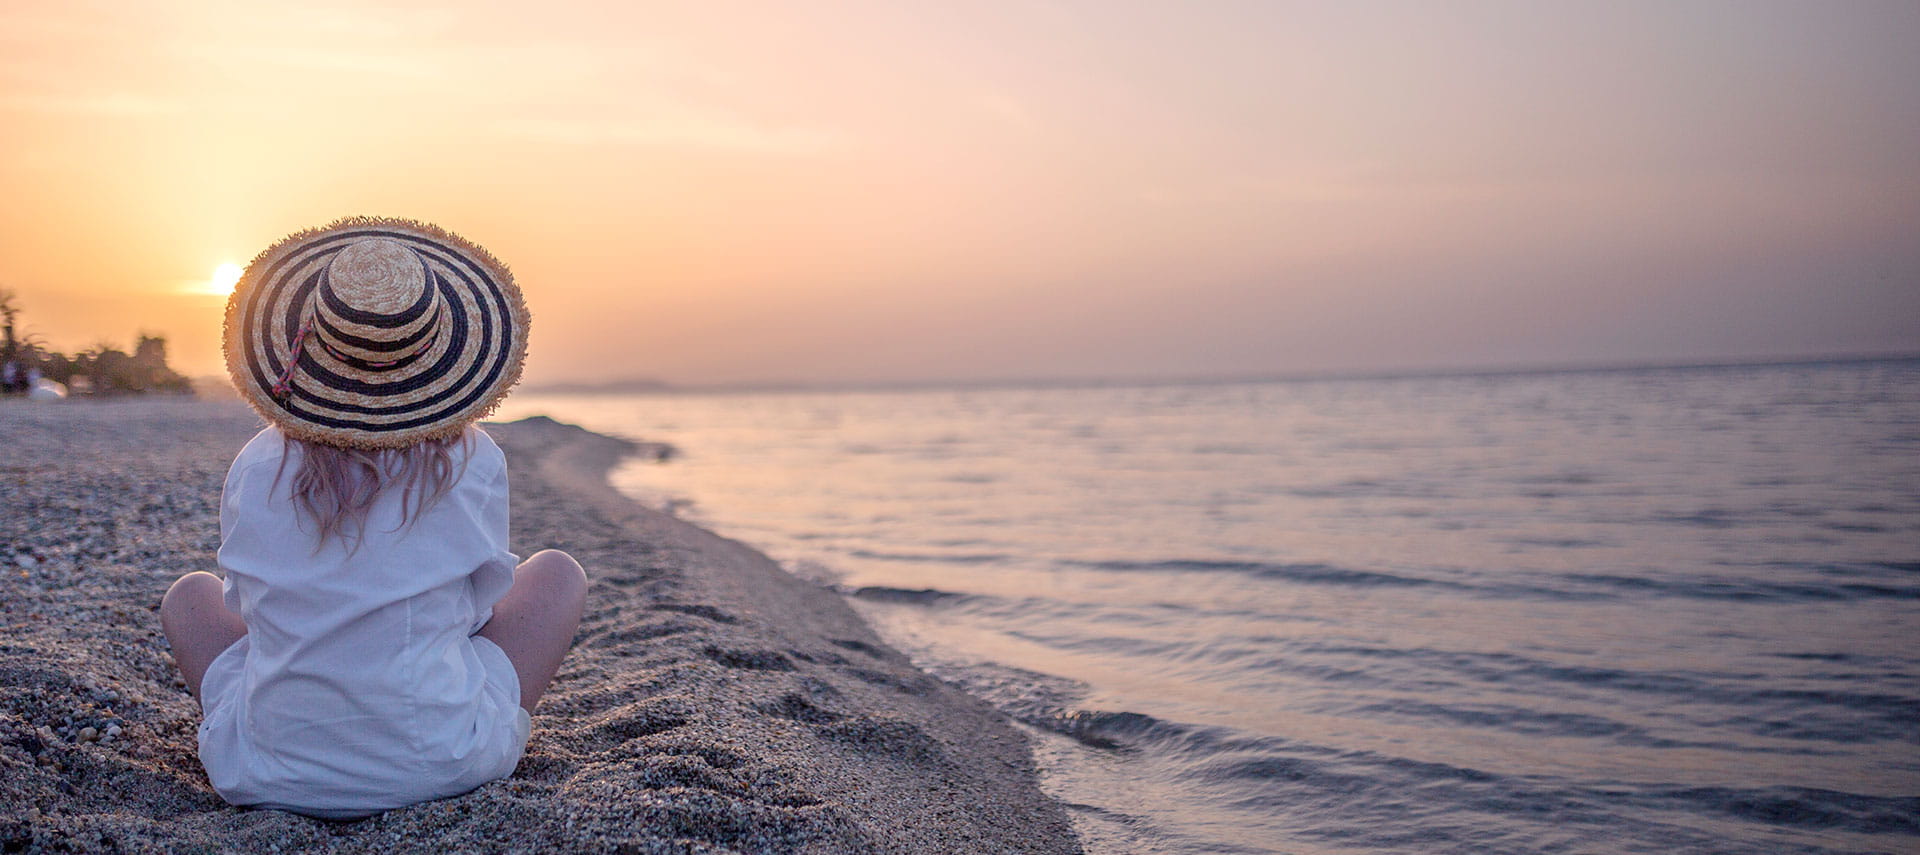 A women sitting down on the beach watching the sunset.